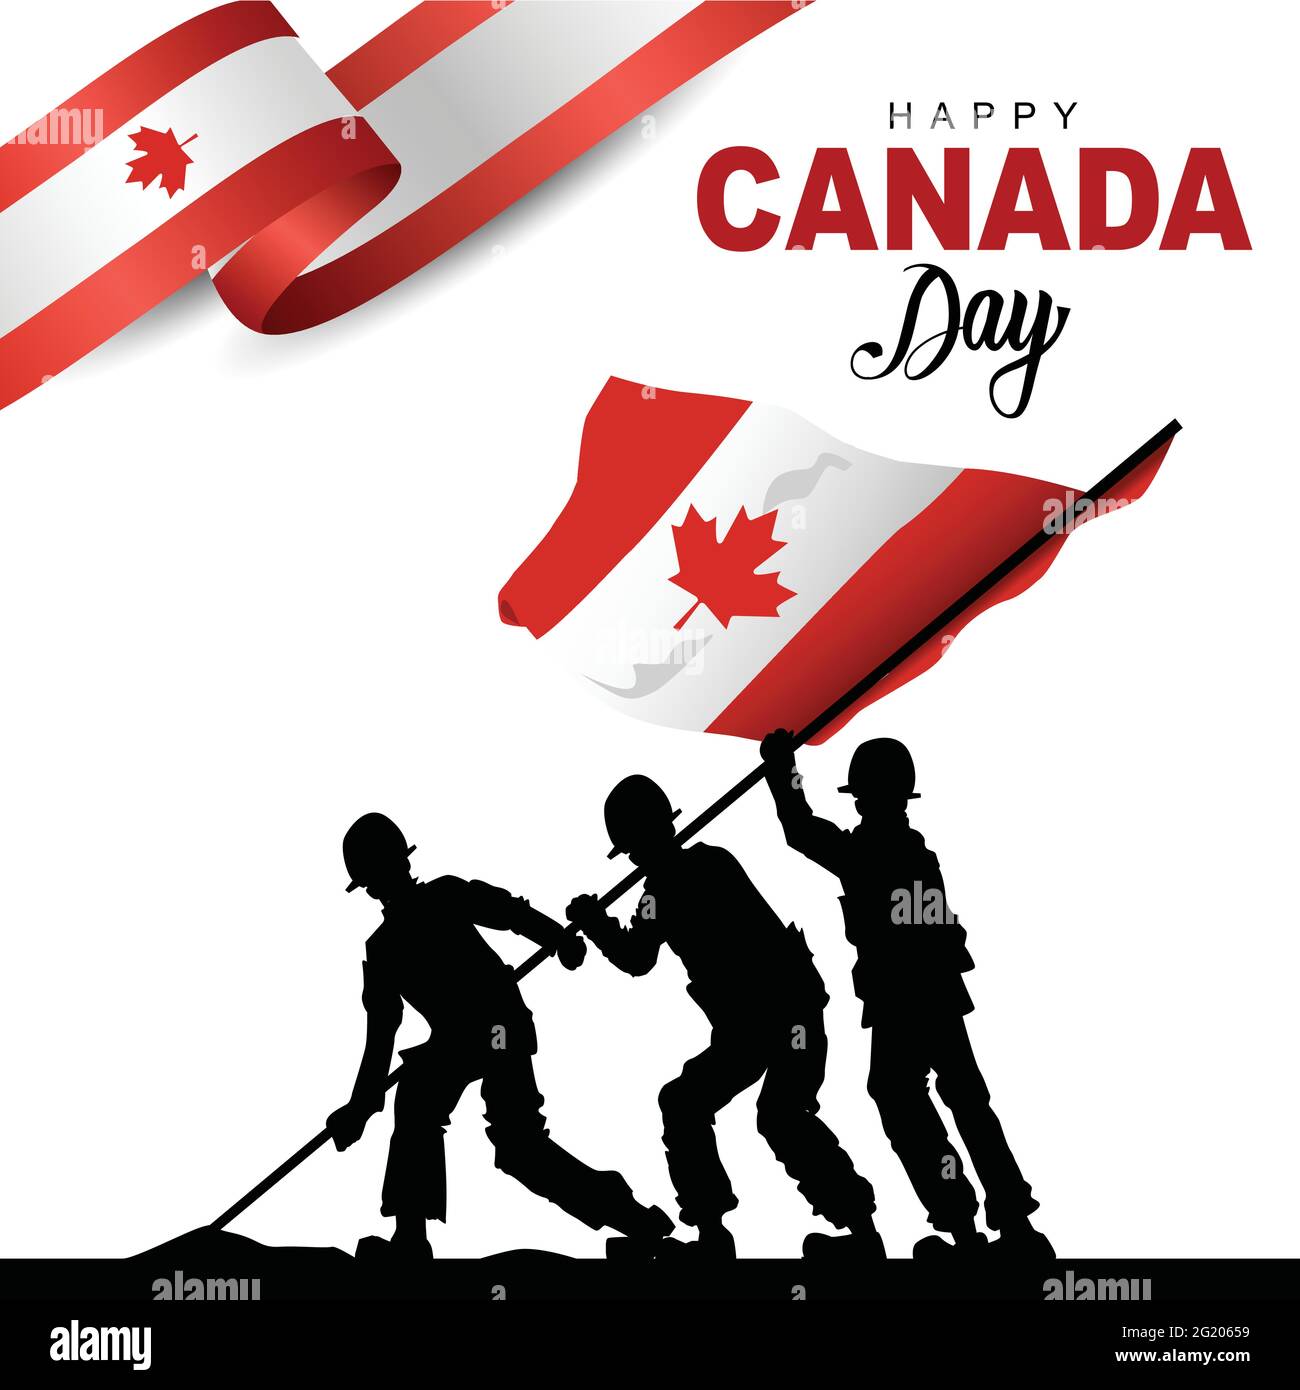 Happy Canada day Vector Template Design Illustration. silhouette soldiers raising with flag Stock Vector